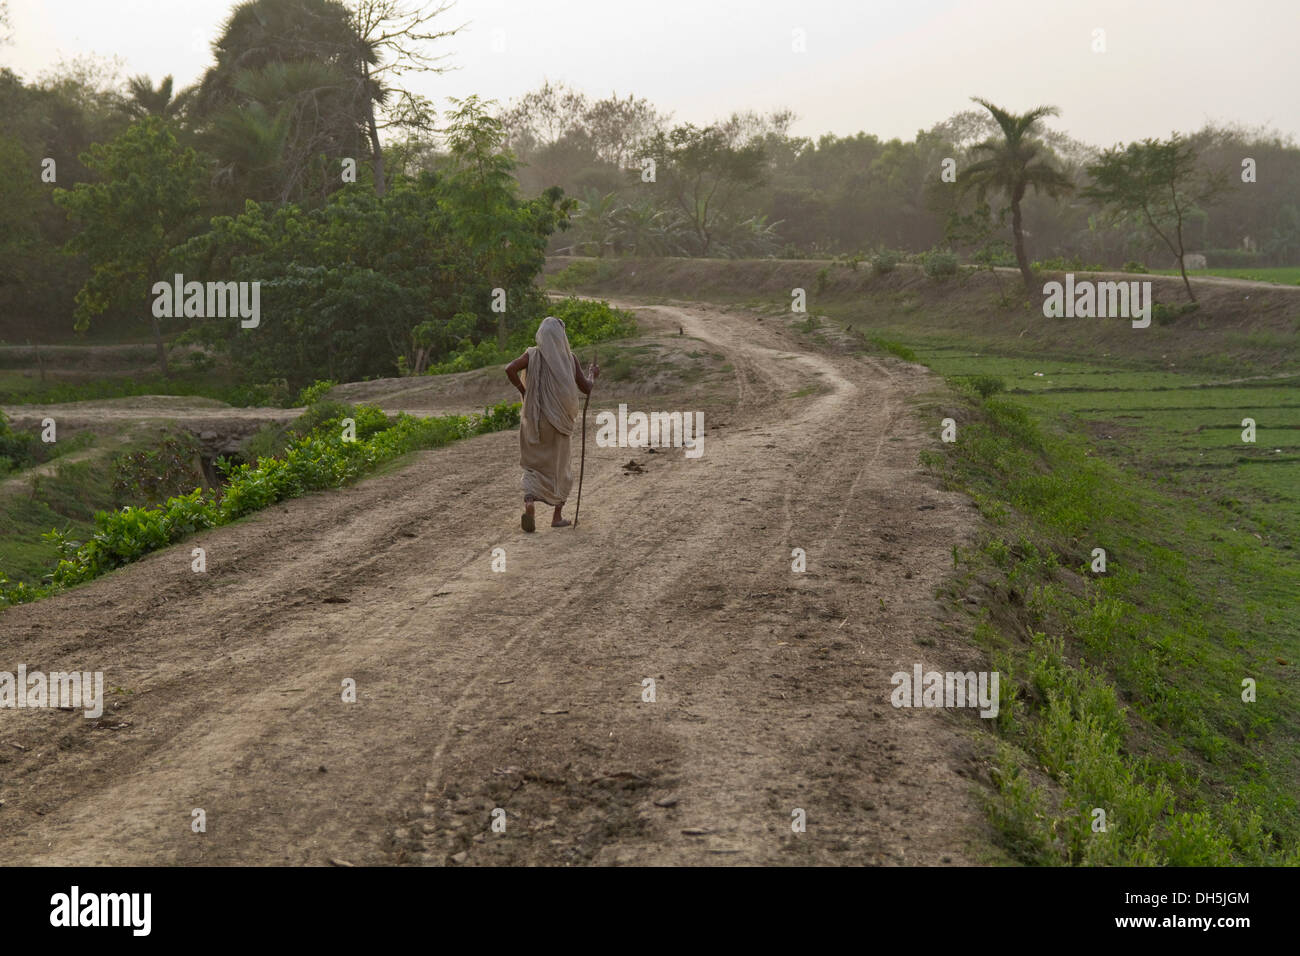 Old woman with a walking stick walking along a dirt road in the evening light, Magura, Khulna District, Bangladesh, South Asia Stock Photo